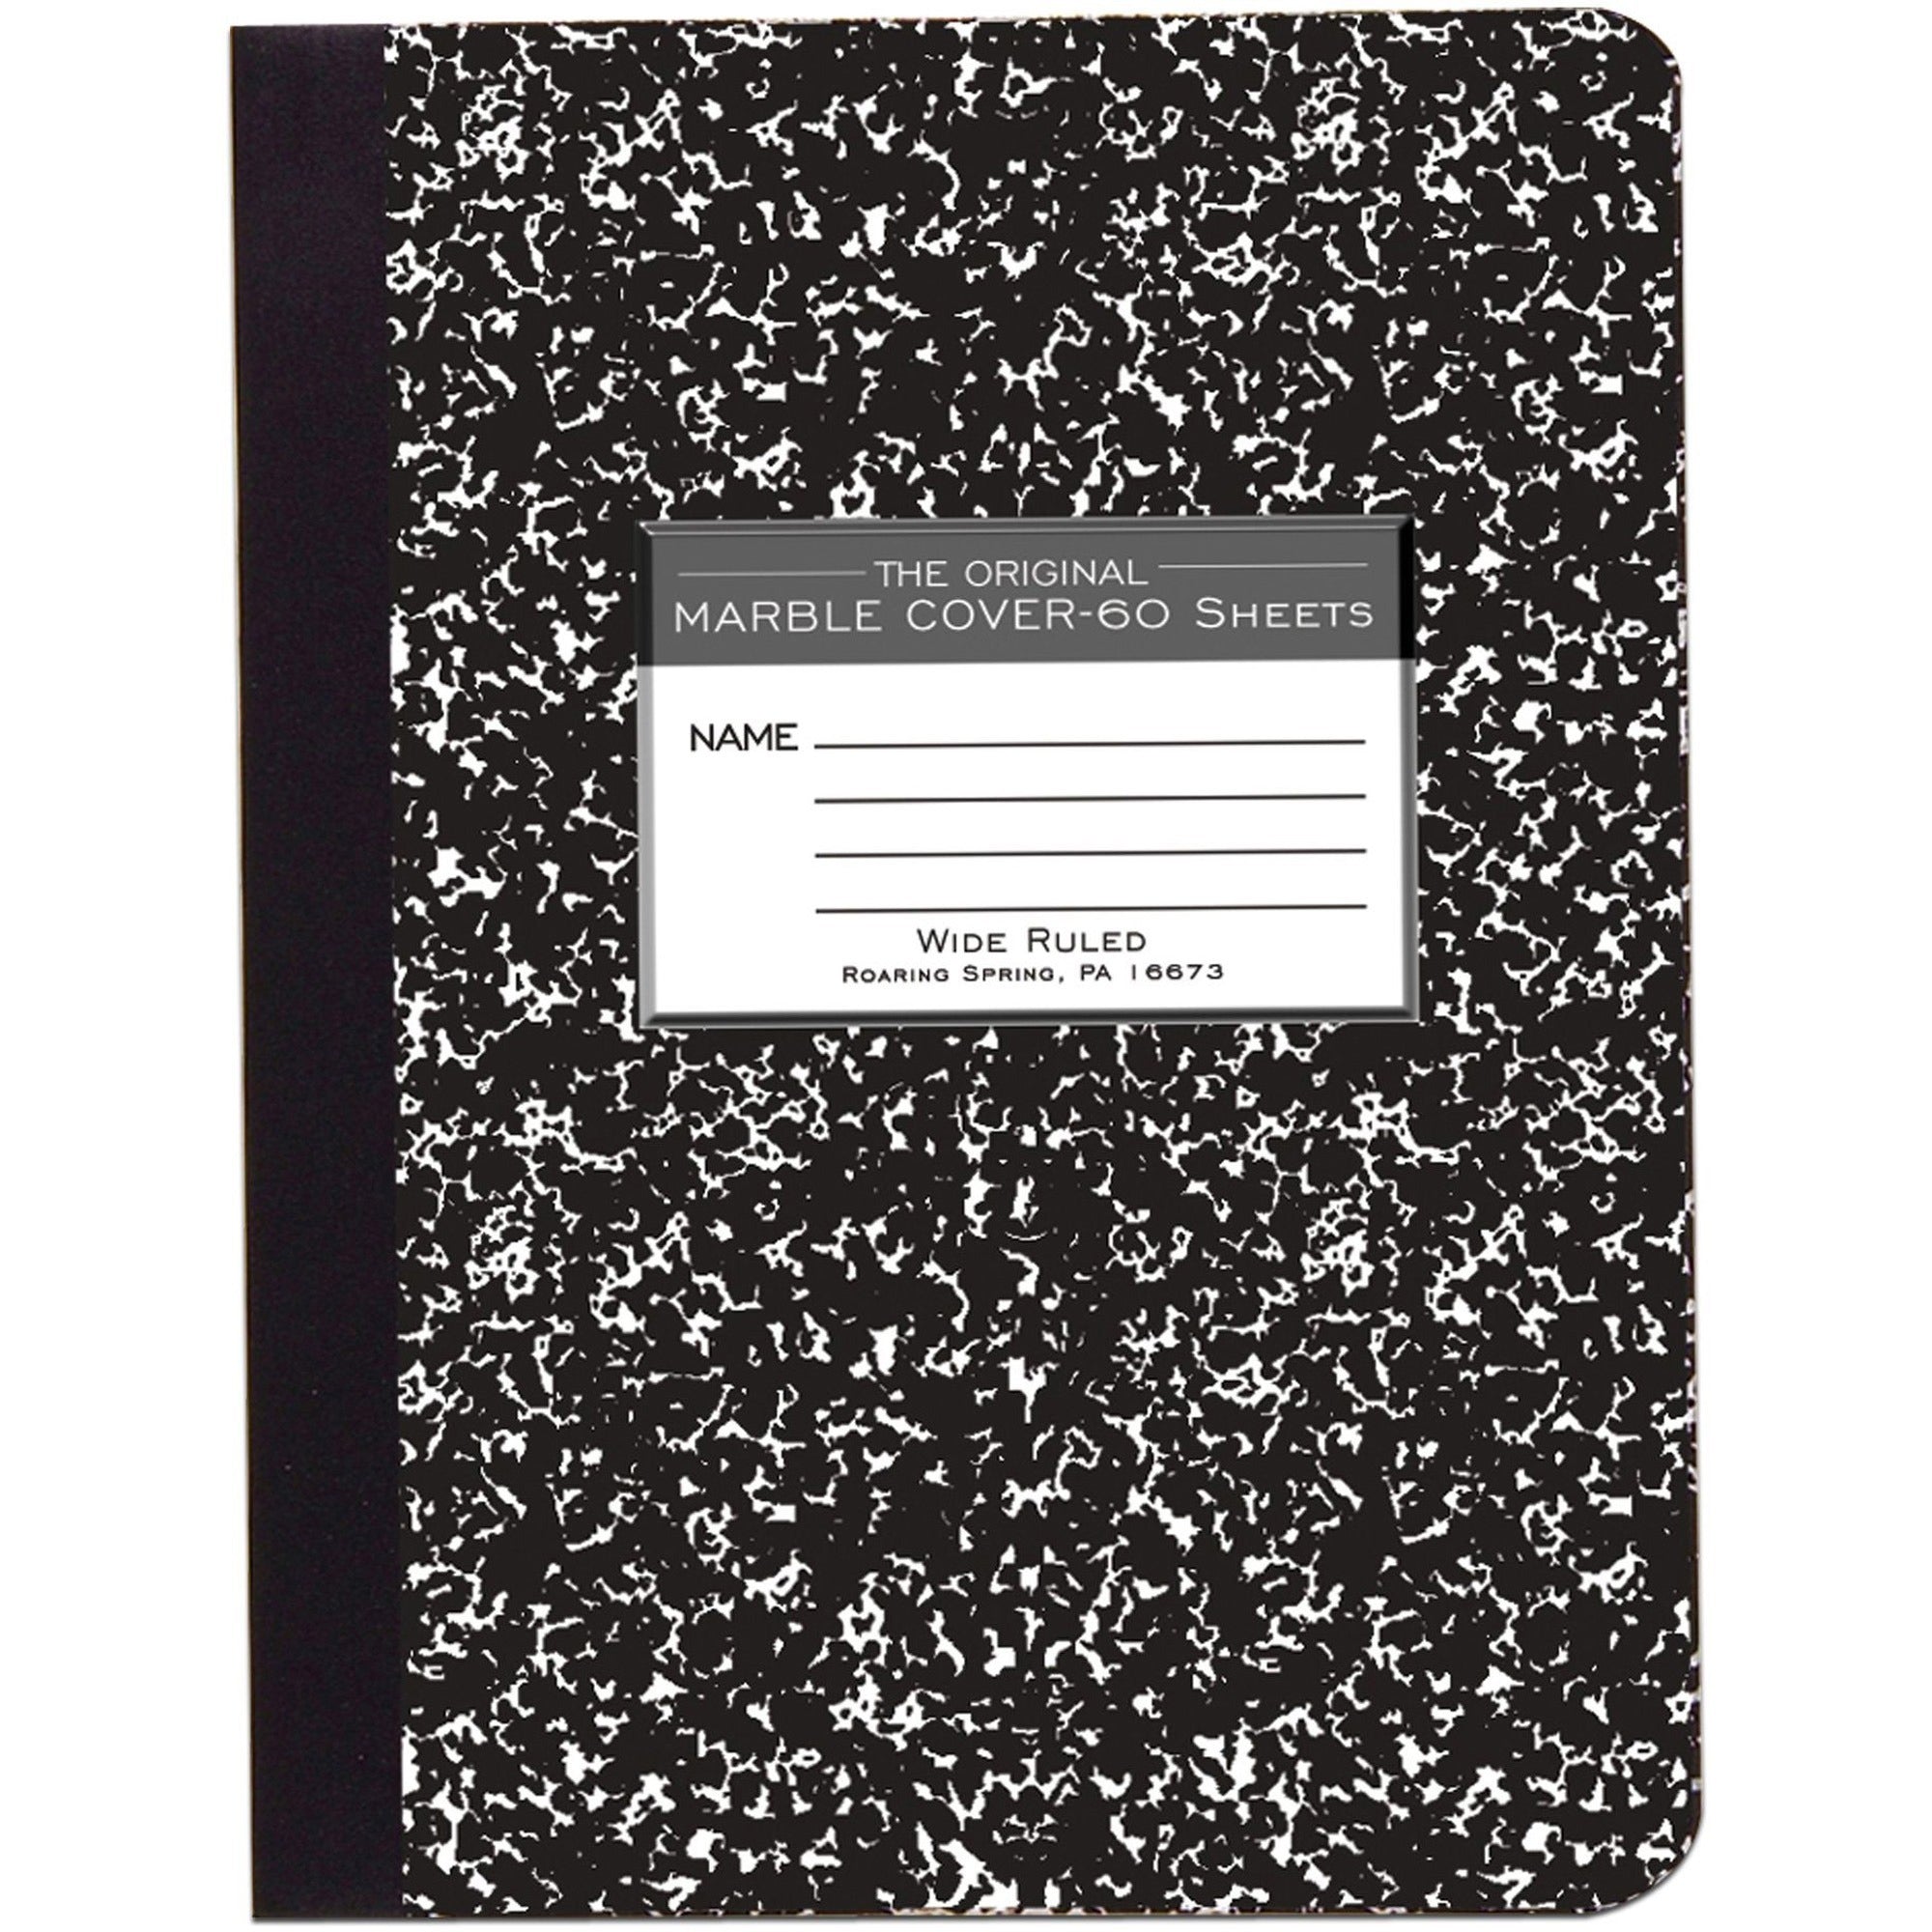 Roaring Spring Wide Ruled Hard Cover Composition Book - 60 Sheets - 120 Pages - Printed - Sewn/Tapebound - Both Side Ruling Surface - Red Margin - 15 lb Basis Weight - 56 g/m2 Grammage - 9 3/4" x 7 1/2" - 0.27" x 7.5" x 9.8" - White Paper - Blac - 